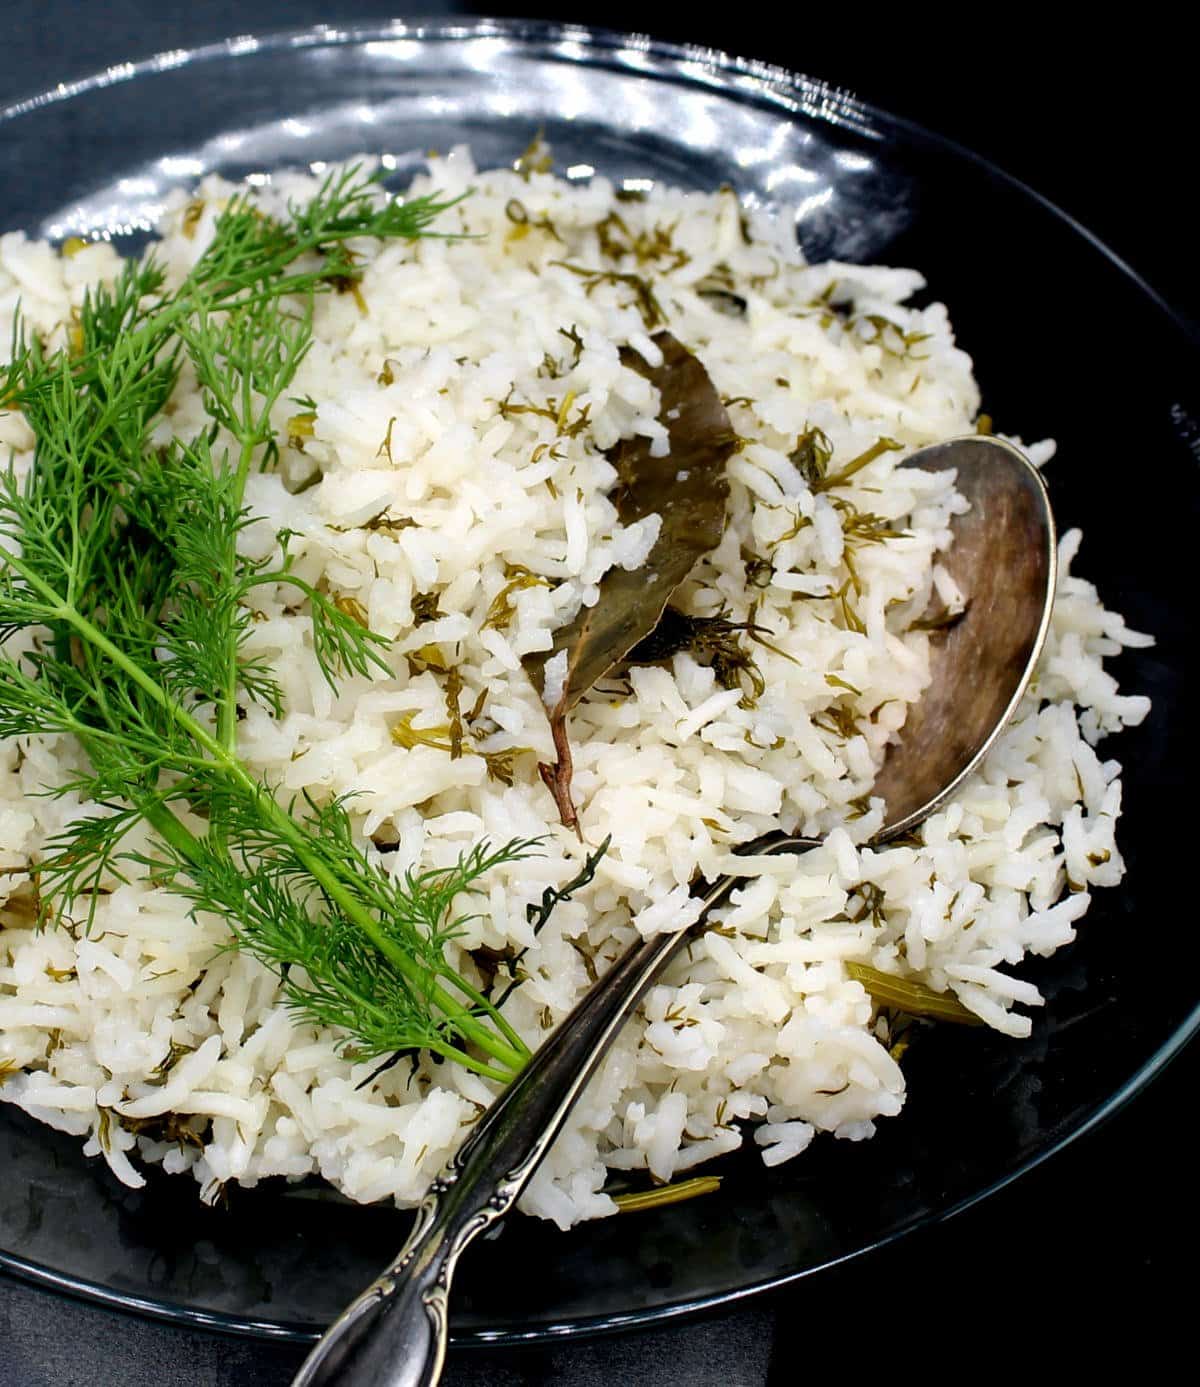 Dill rice in glass bowl with spoon and fresh dill.